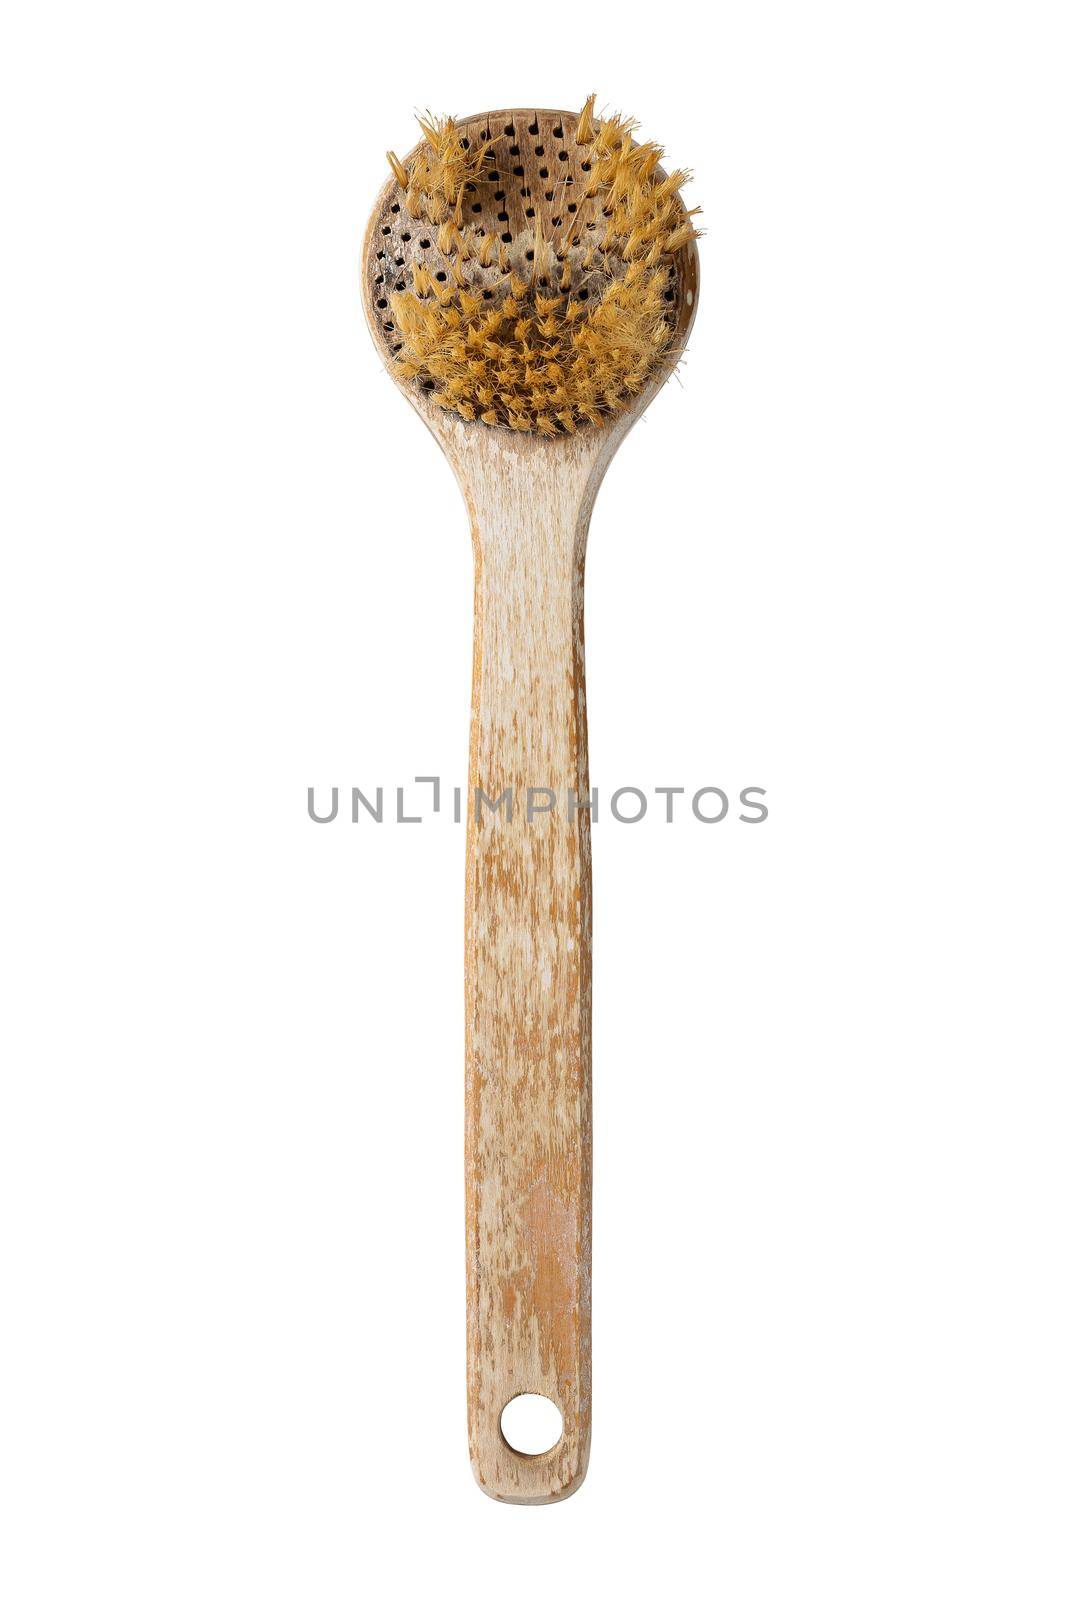 Old and dirty ruined wooden bath body brush or shower back scrubber with long handle isolated on white background, natural hair boar bristle